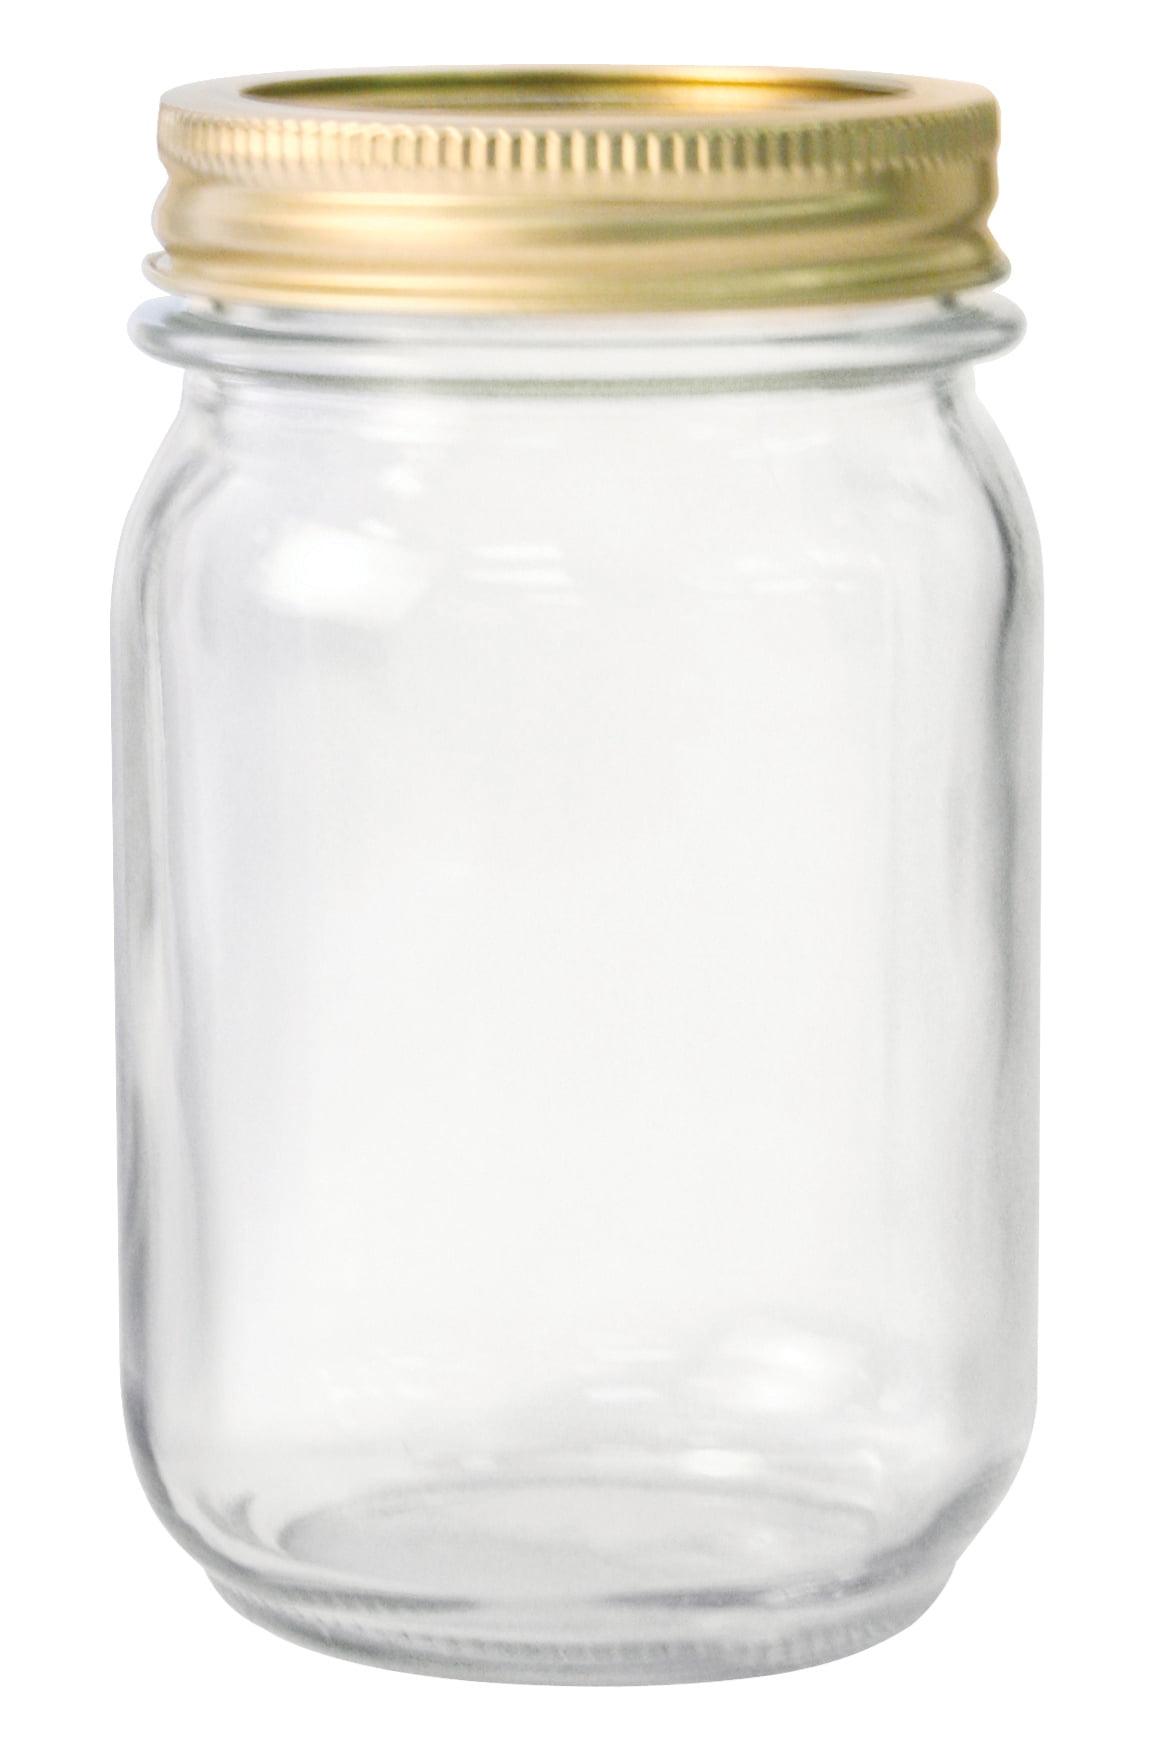 NMS 8 Ounce Glass Tall Mason Canning Jars 58mm Mouth - Case of 12 - With  Gold Lids